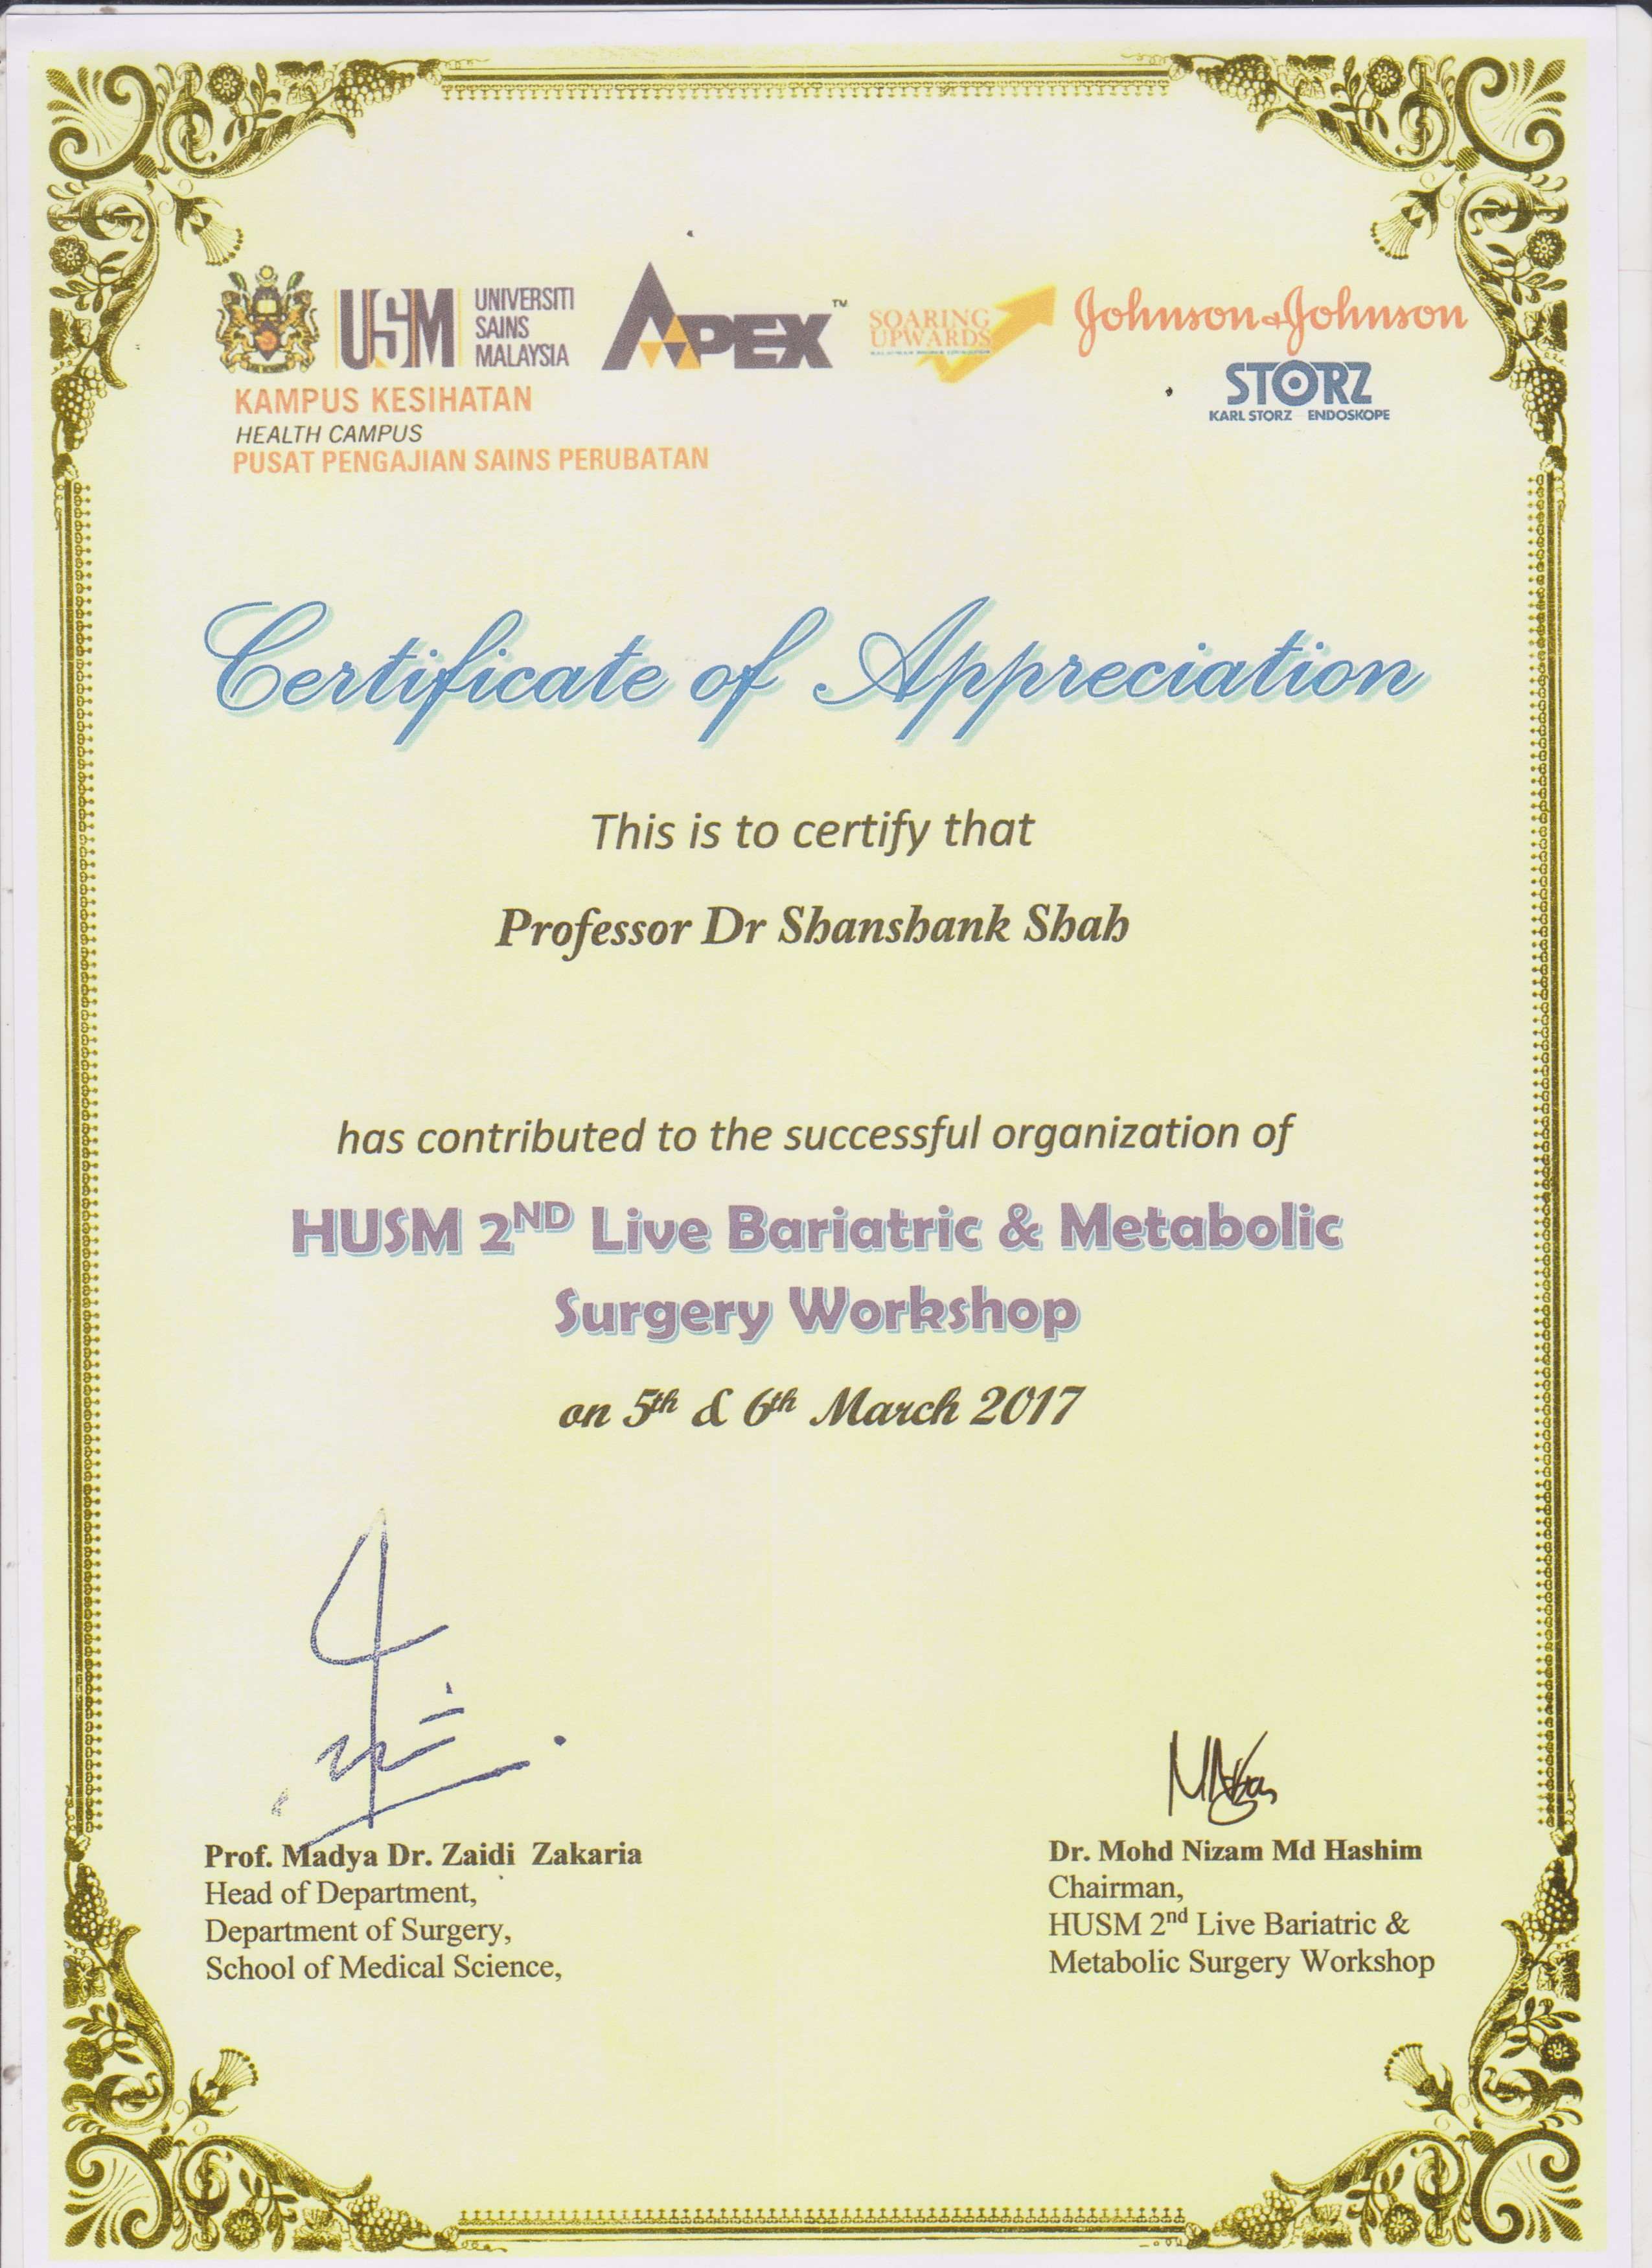 Dr Shashank Shah has contributed to the HUSM 2nd Live Bariatric and Metabolic Surgery Workshop held in March 2017 at Malaysia.  